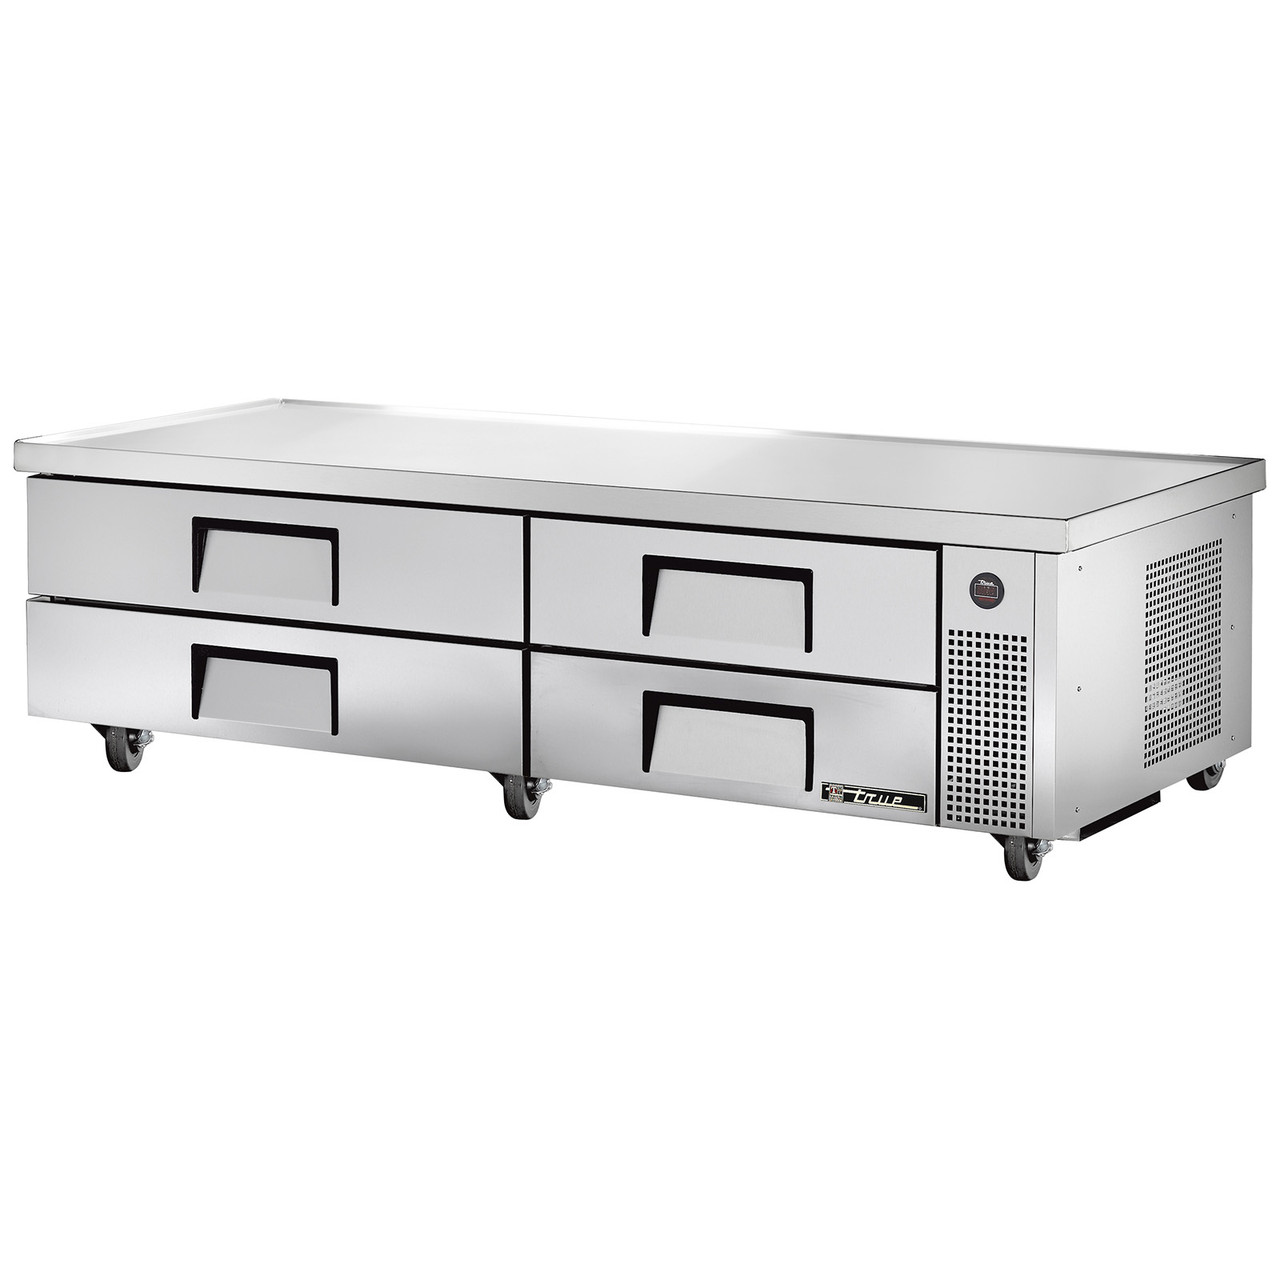 True Manufacturing TRCB-82-84 84" Refrigerated Chef Base / Equipment Stand